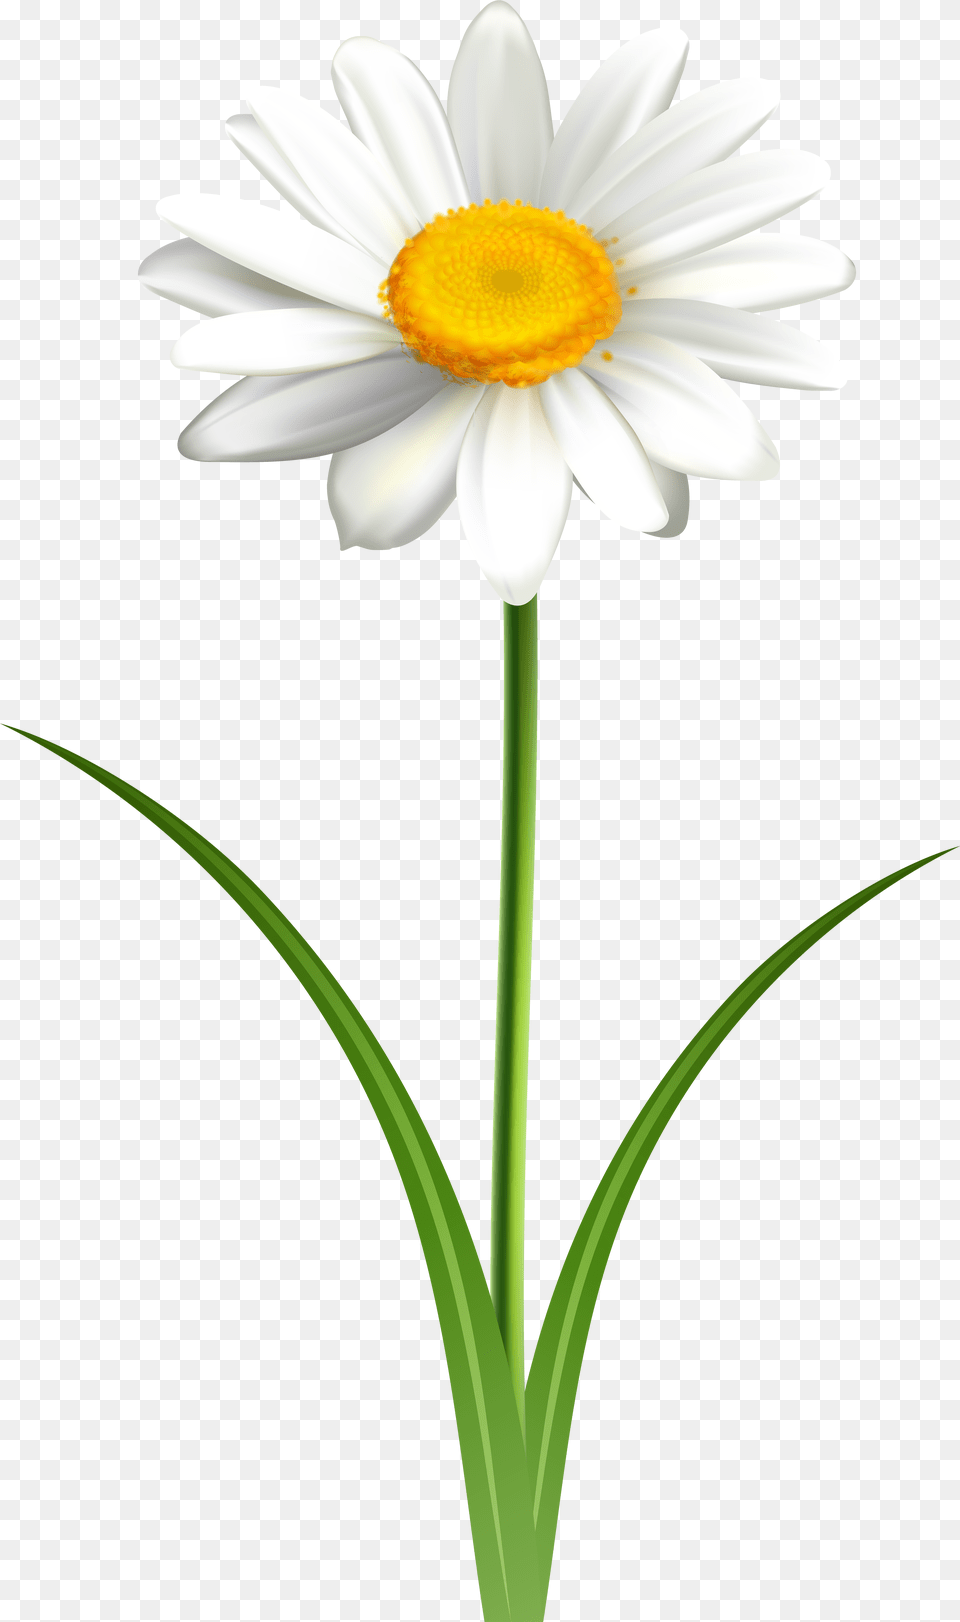 Library Daisy Files Flower Daisies Transparent Background, Plant, Petal Png Image